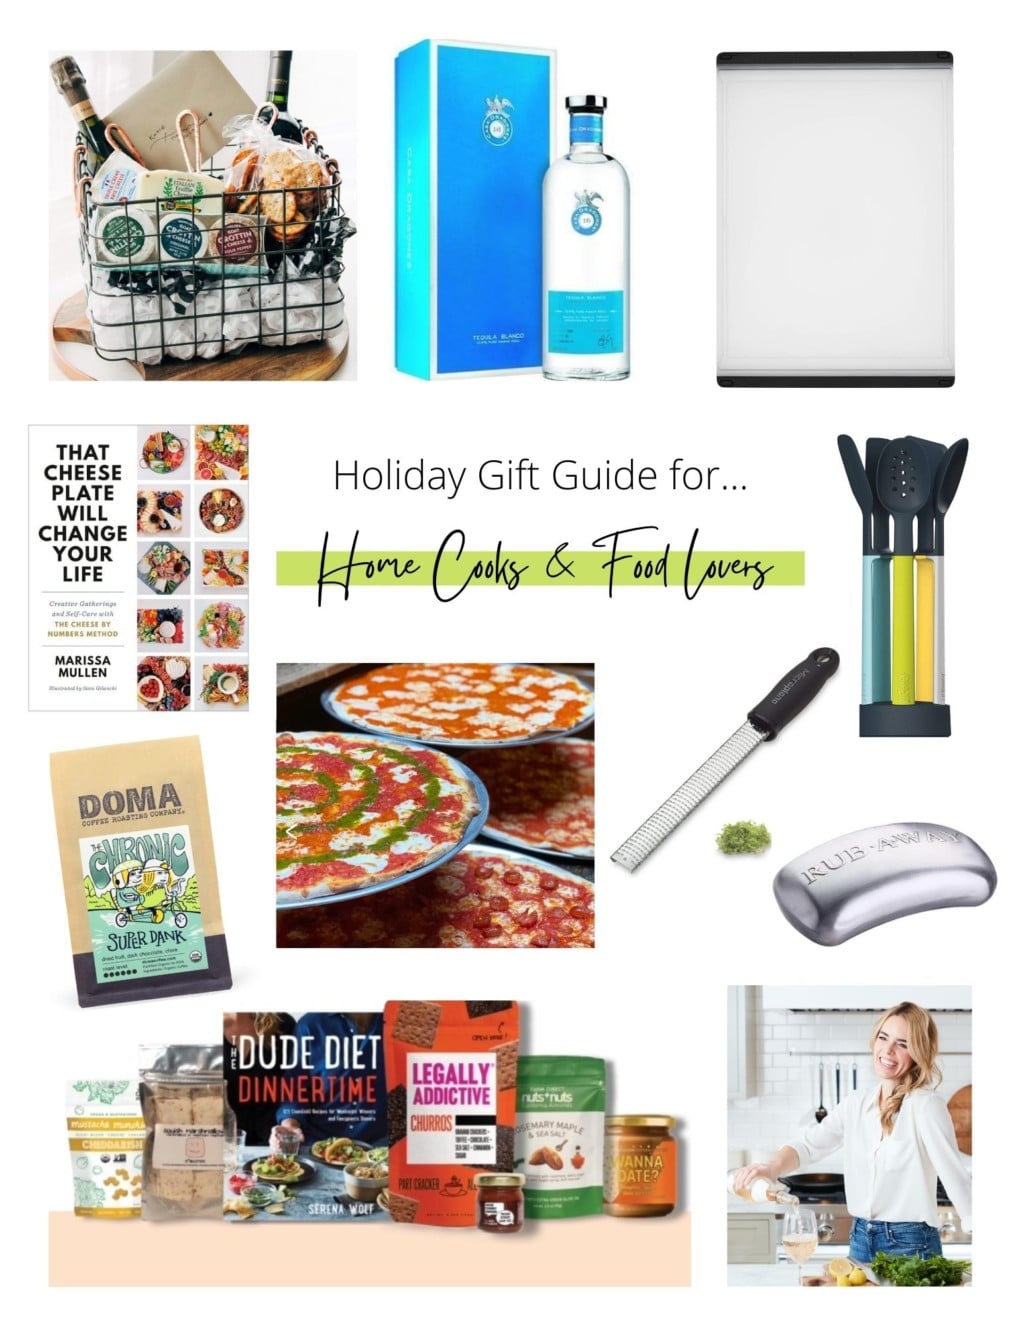 Collage of holiday gift ideas for home cooks and food lovers.